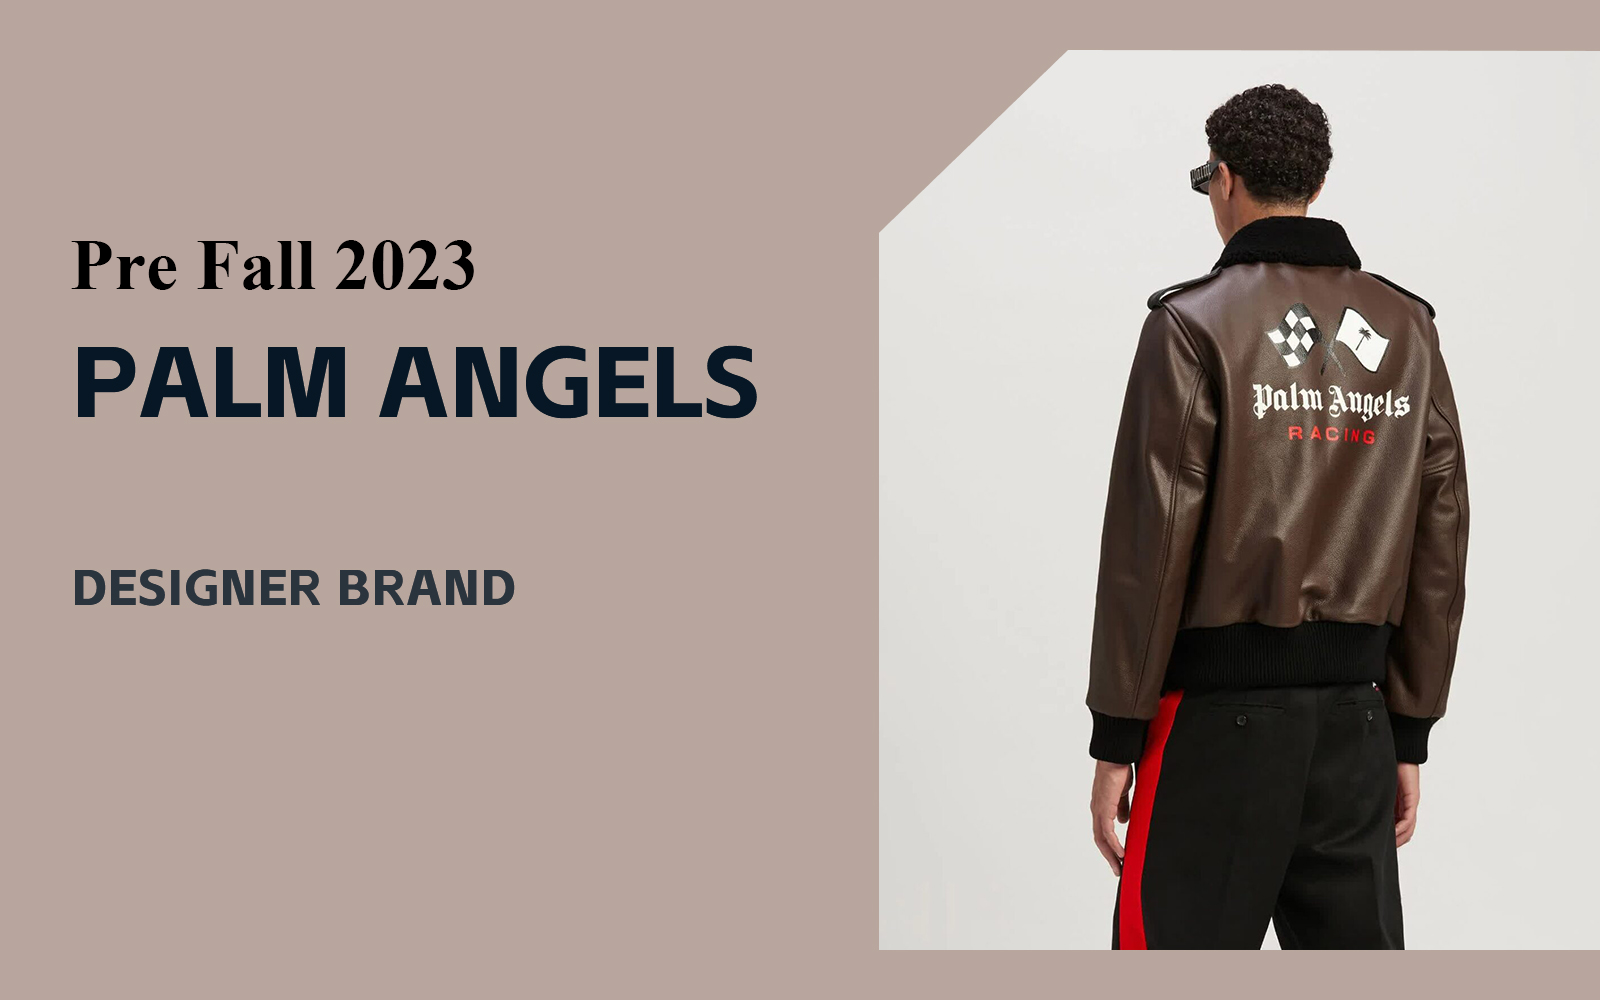 Street Style -- The Analysis of Palm Angels The Menswear Designer Brand